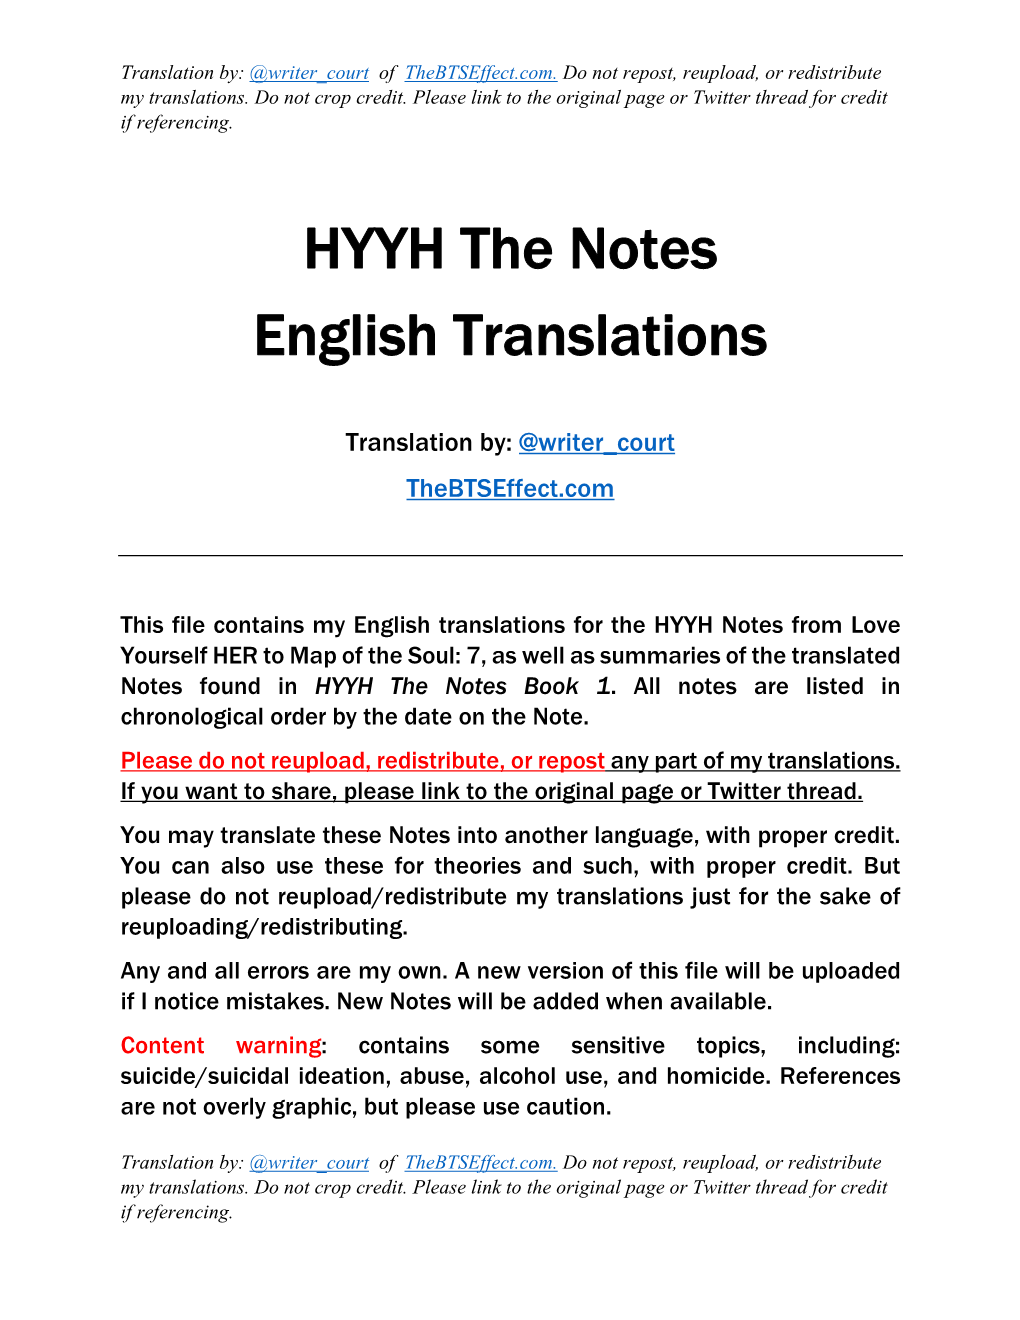 HYYH the Notes English Translations